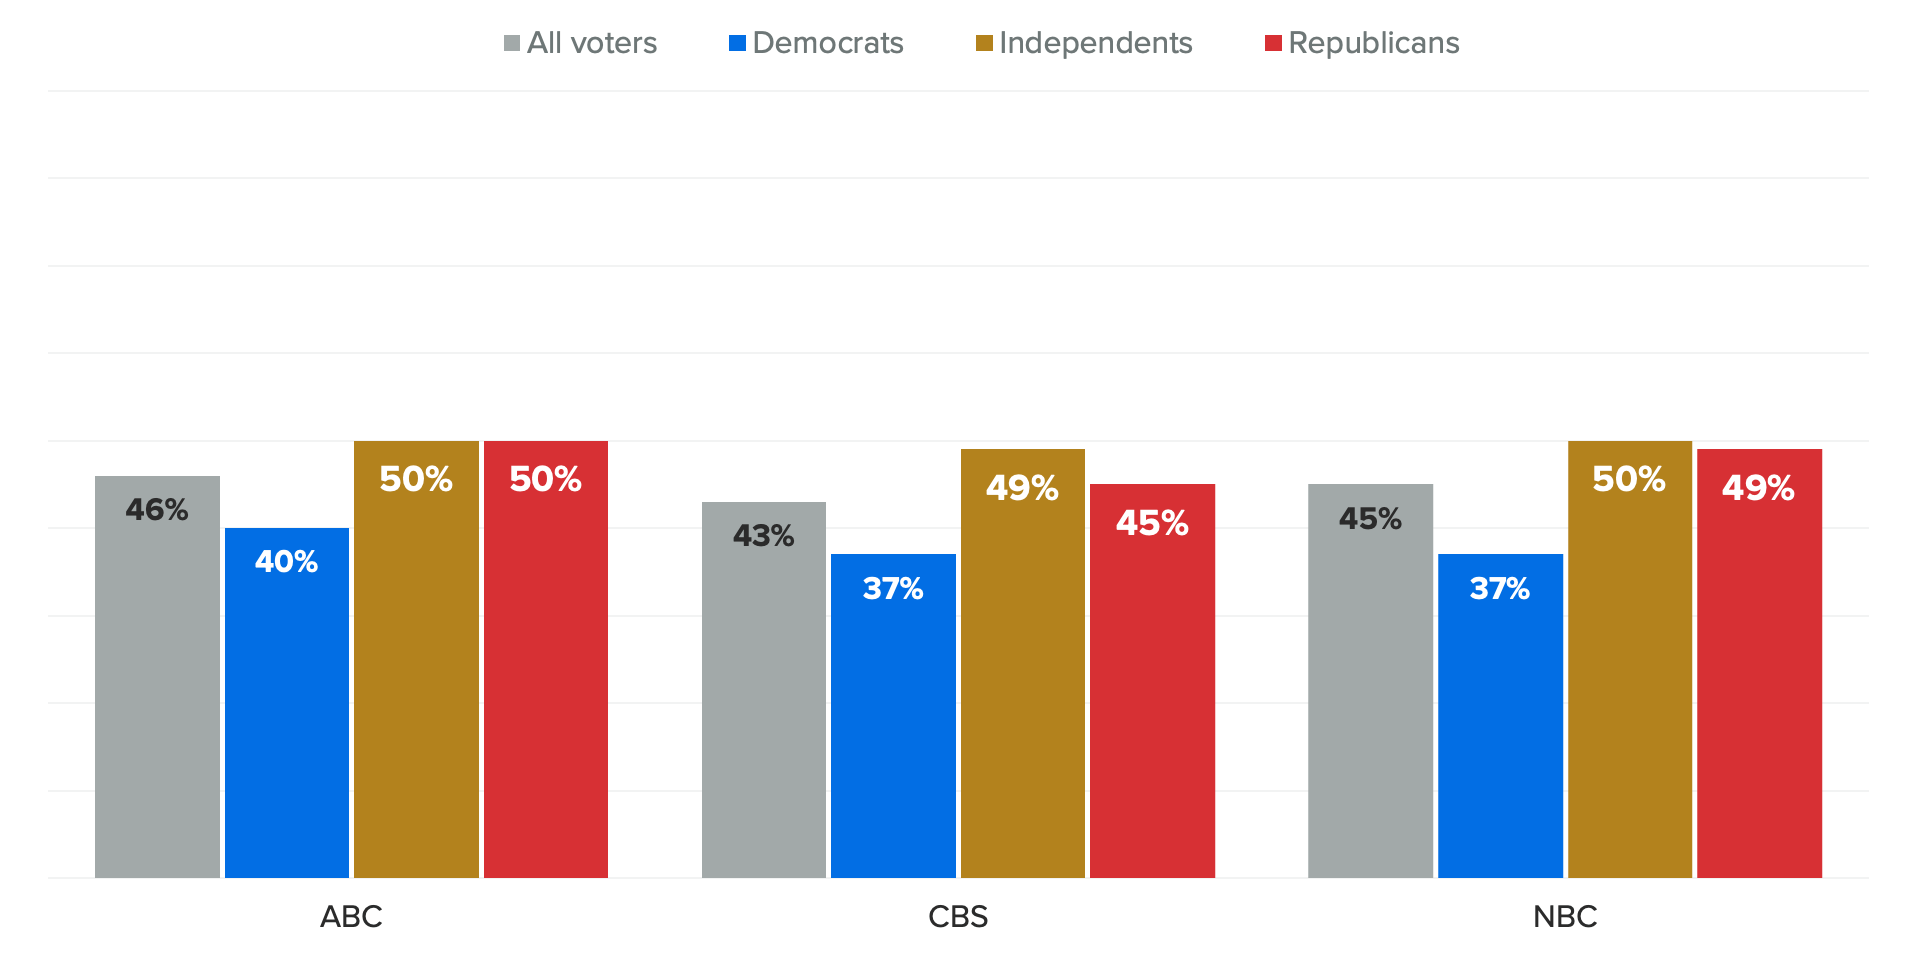 Bar chart of the party affiliation of voters who never use the major broadcast networks, showing just under half of voters tune out ABC, CBS or NBC.